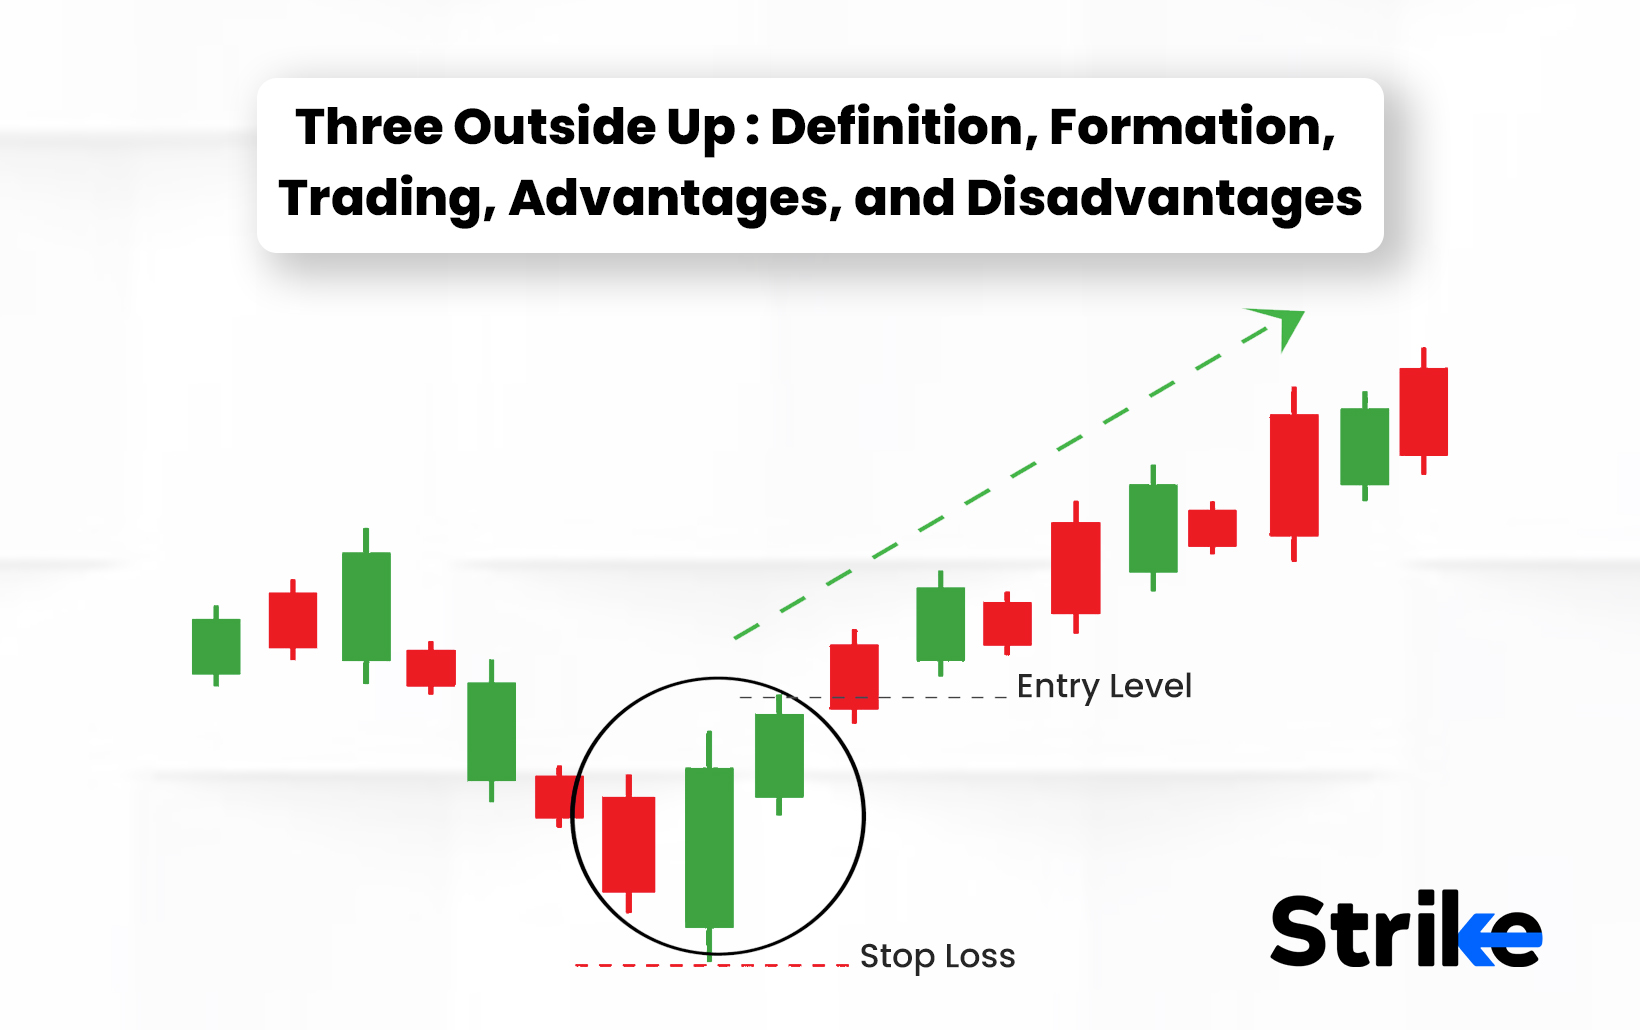 Three Outside Up: Definition, Formation, Trading, Advantages, and Disadvantages